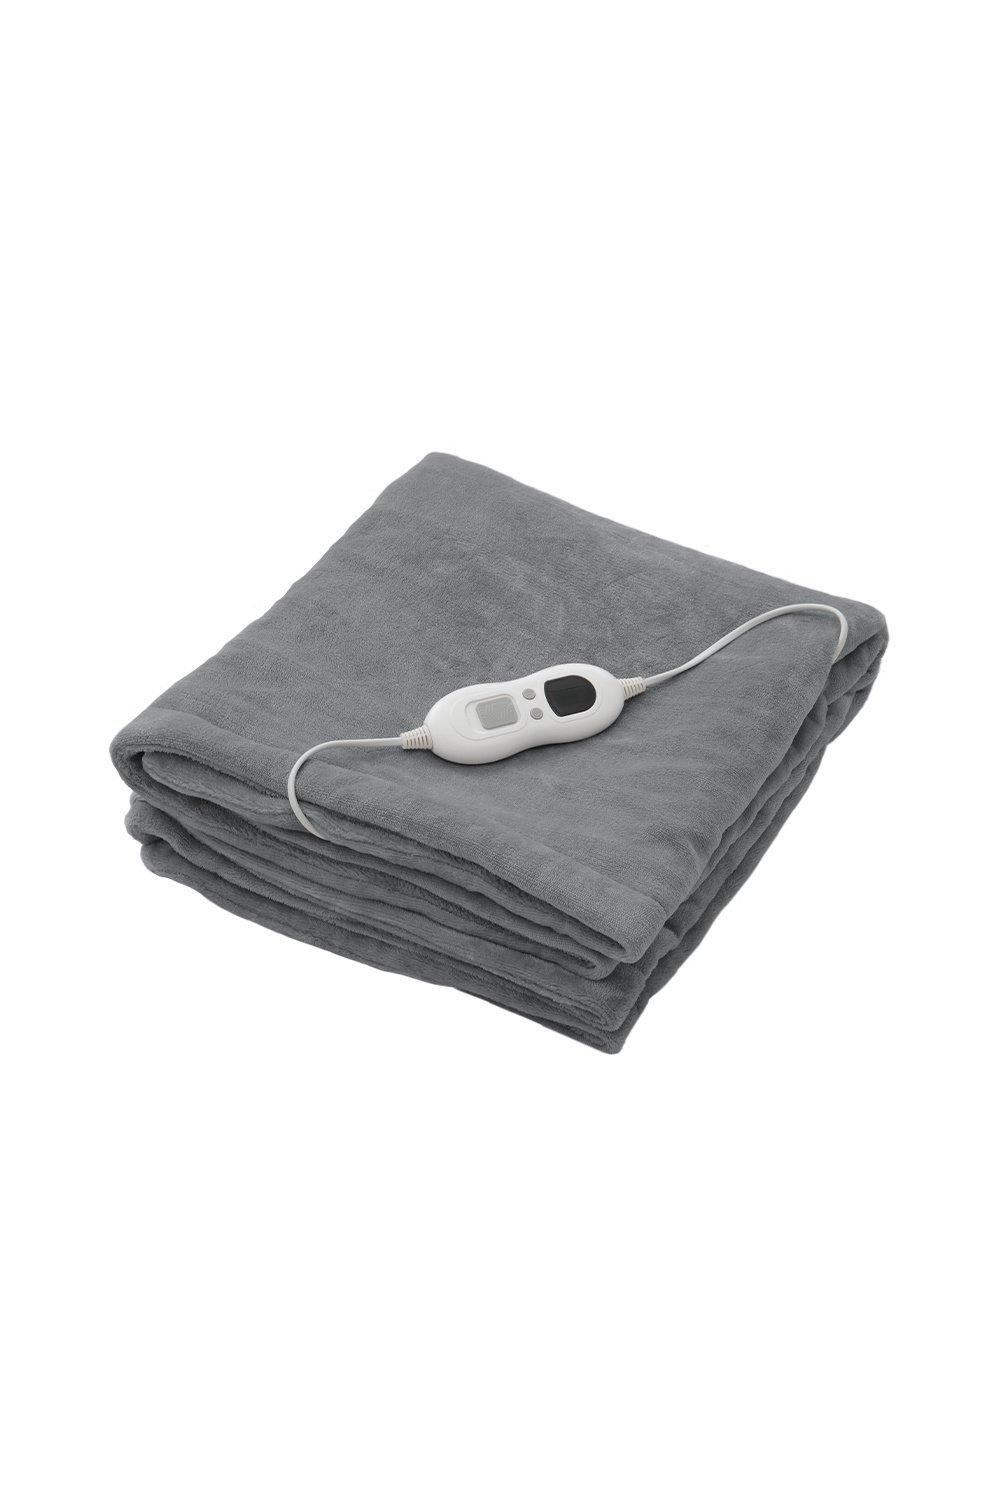 160cm X 130cm Double-Sided Flannel Heating Throw Blanket